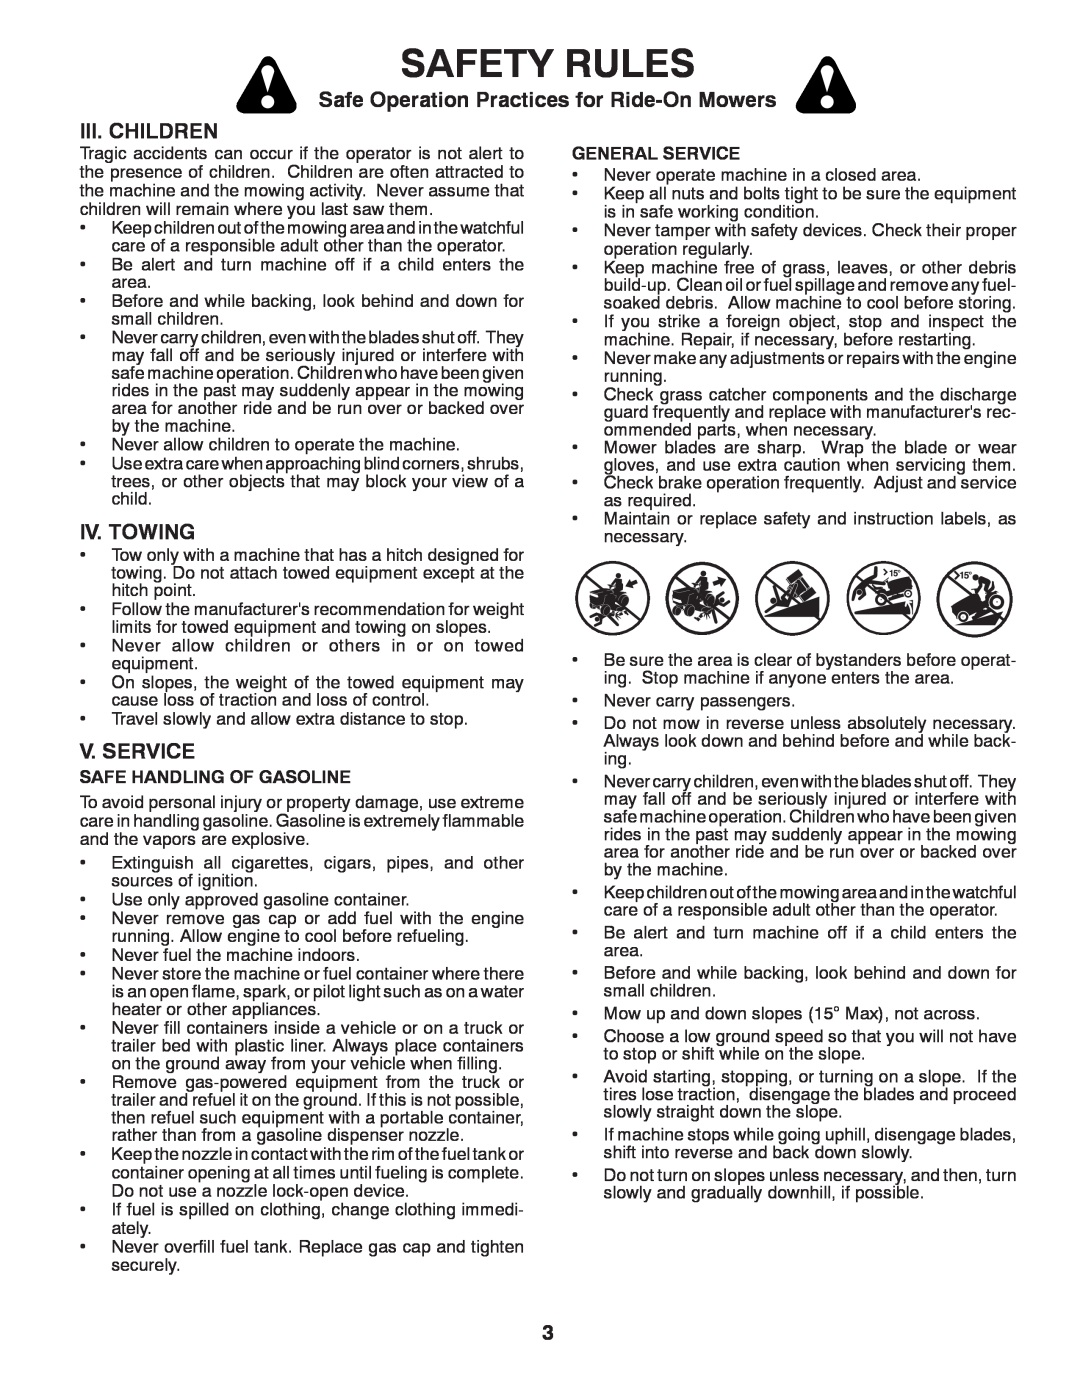 Poulan PXT12530 manual Safety Rules, Safe Operation Practices for Ride-On Mowers, Iii. Children, Iv. Towing, V. Service 